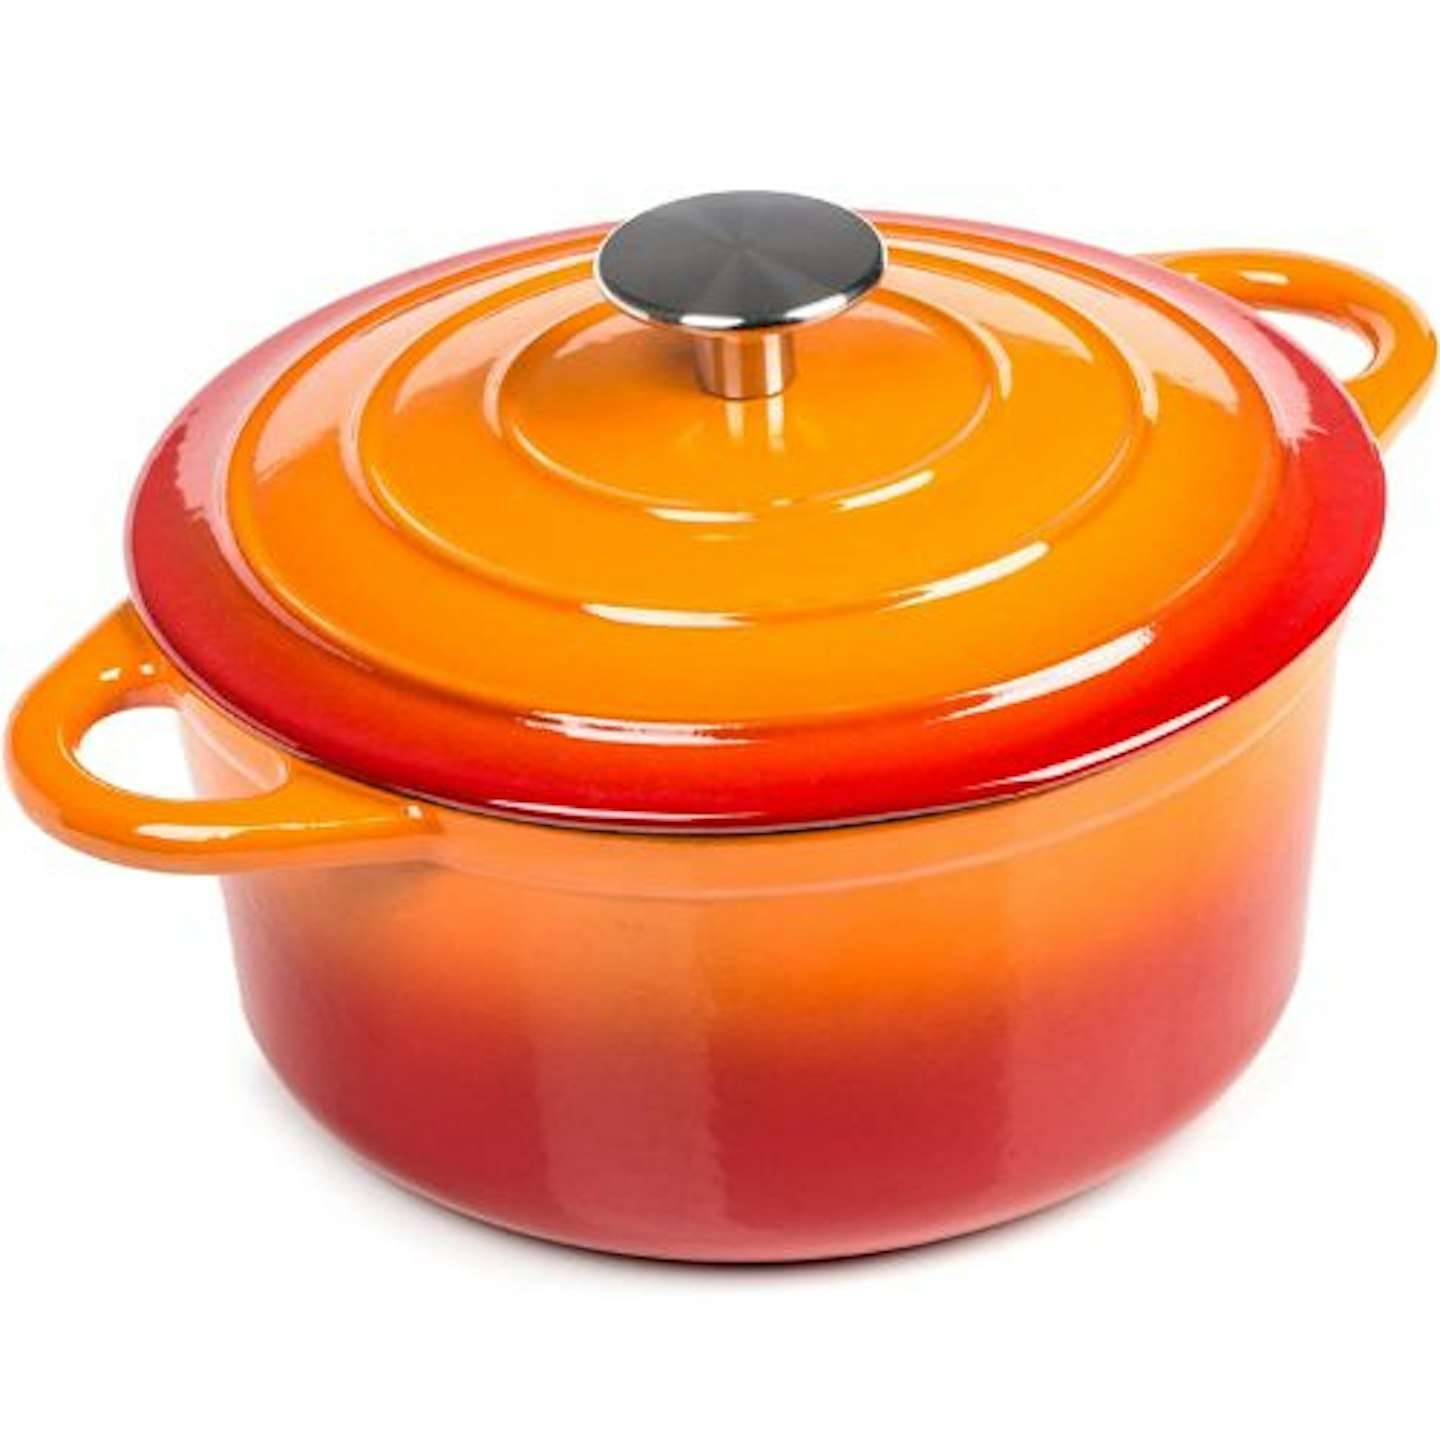 https://images.bauerhosting.com/affiliates/sites/9/2022/09/best-le-creuset-lookalikes-and-dupes-dawsons.jpg?auto=format&w=1440&q=80